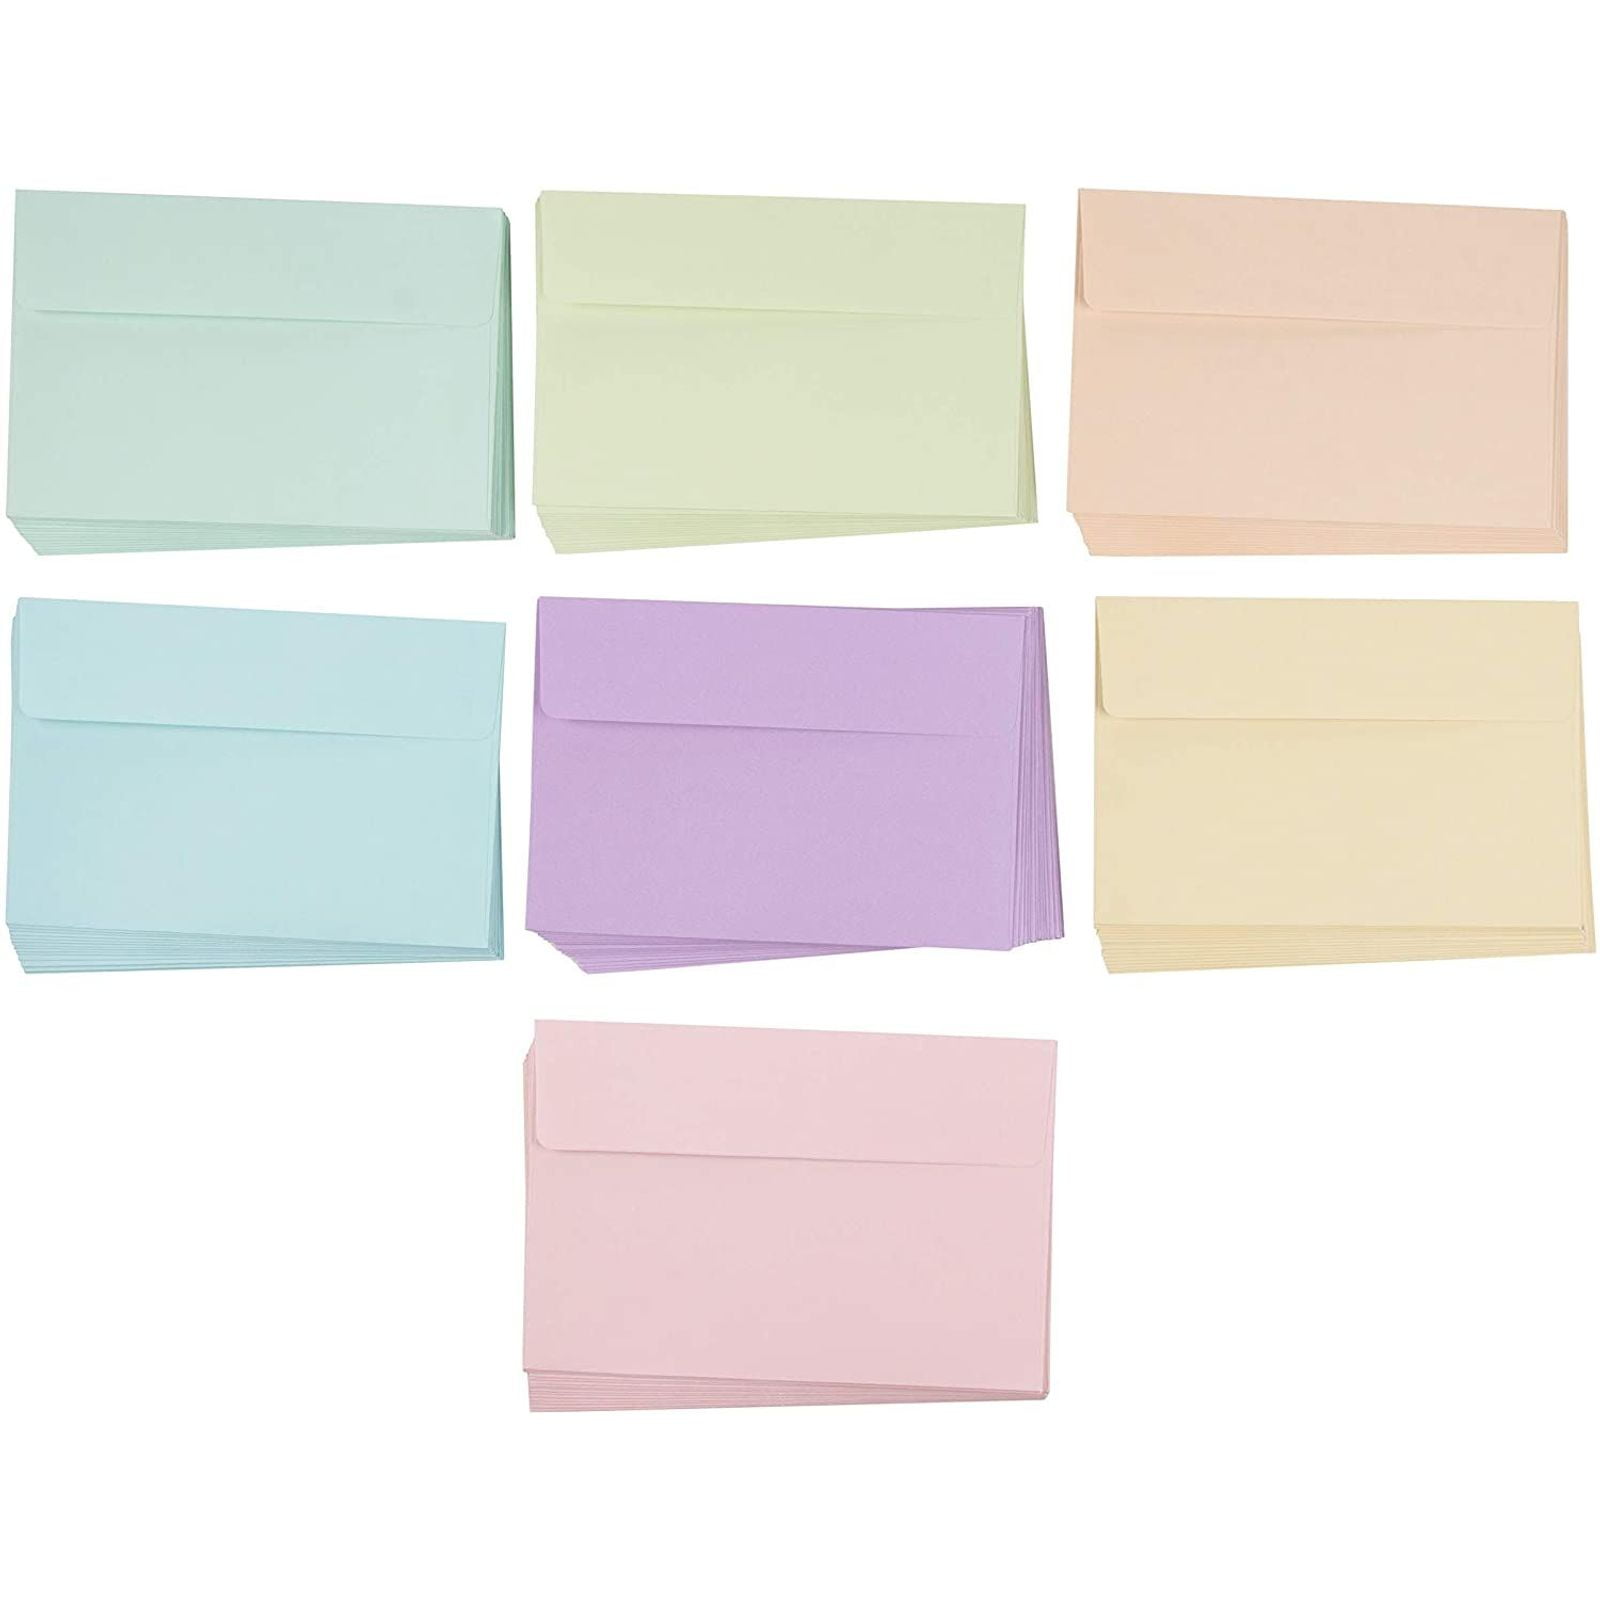 50 ct Pastel Colored Poly Gift Bag Envelopes Free Shipping On Additional 